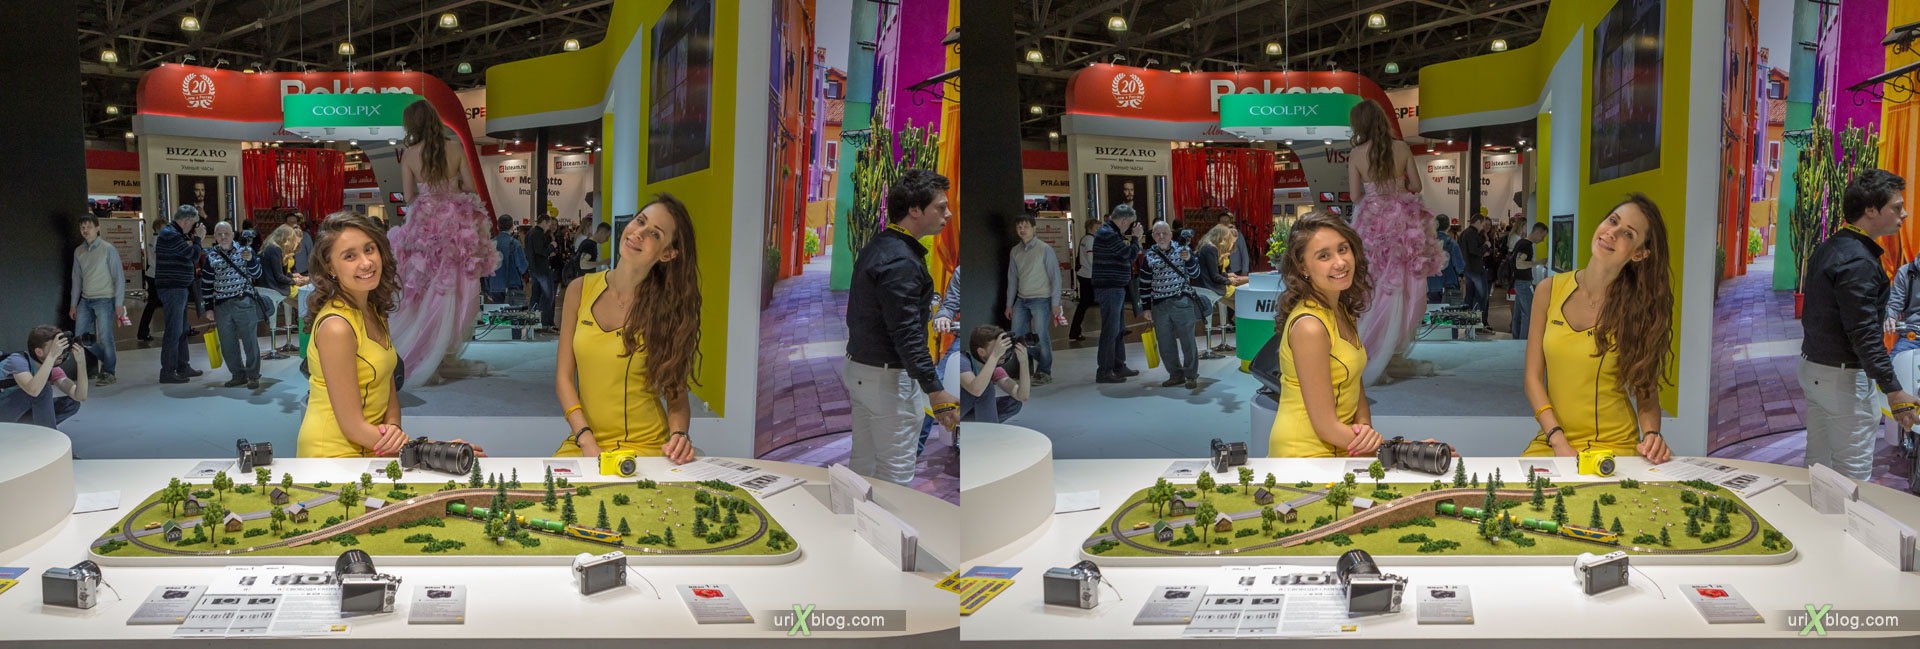 model, girl, Photoforum, exhibition, Crocus Expo, Moscow, Russia, 3D, stereo pair, cross-eyed, crossview, cross view stereo pair, stereoscopic, 2015